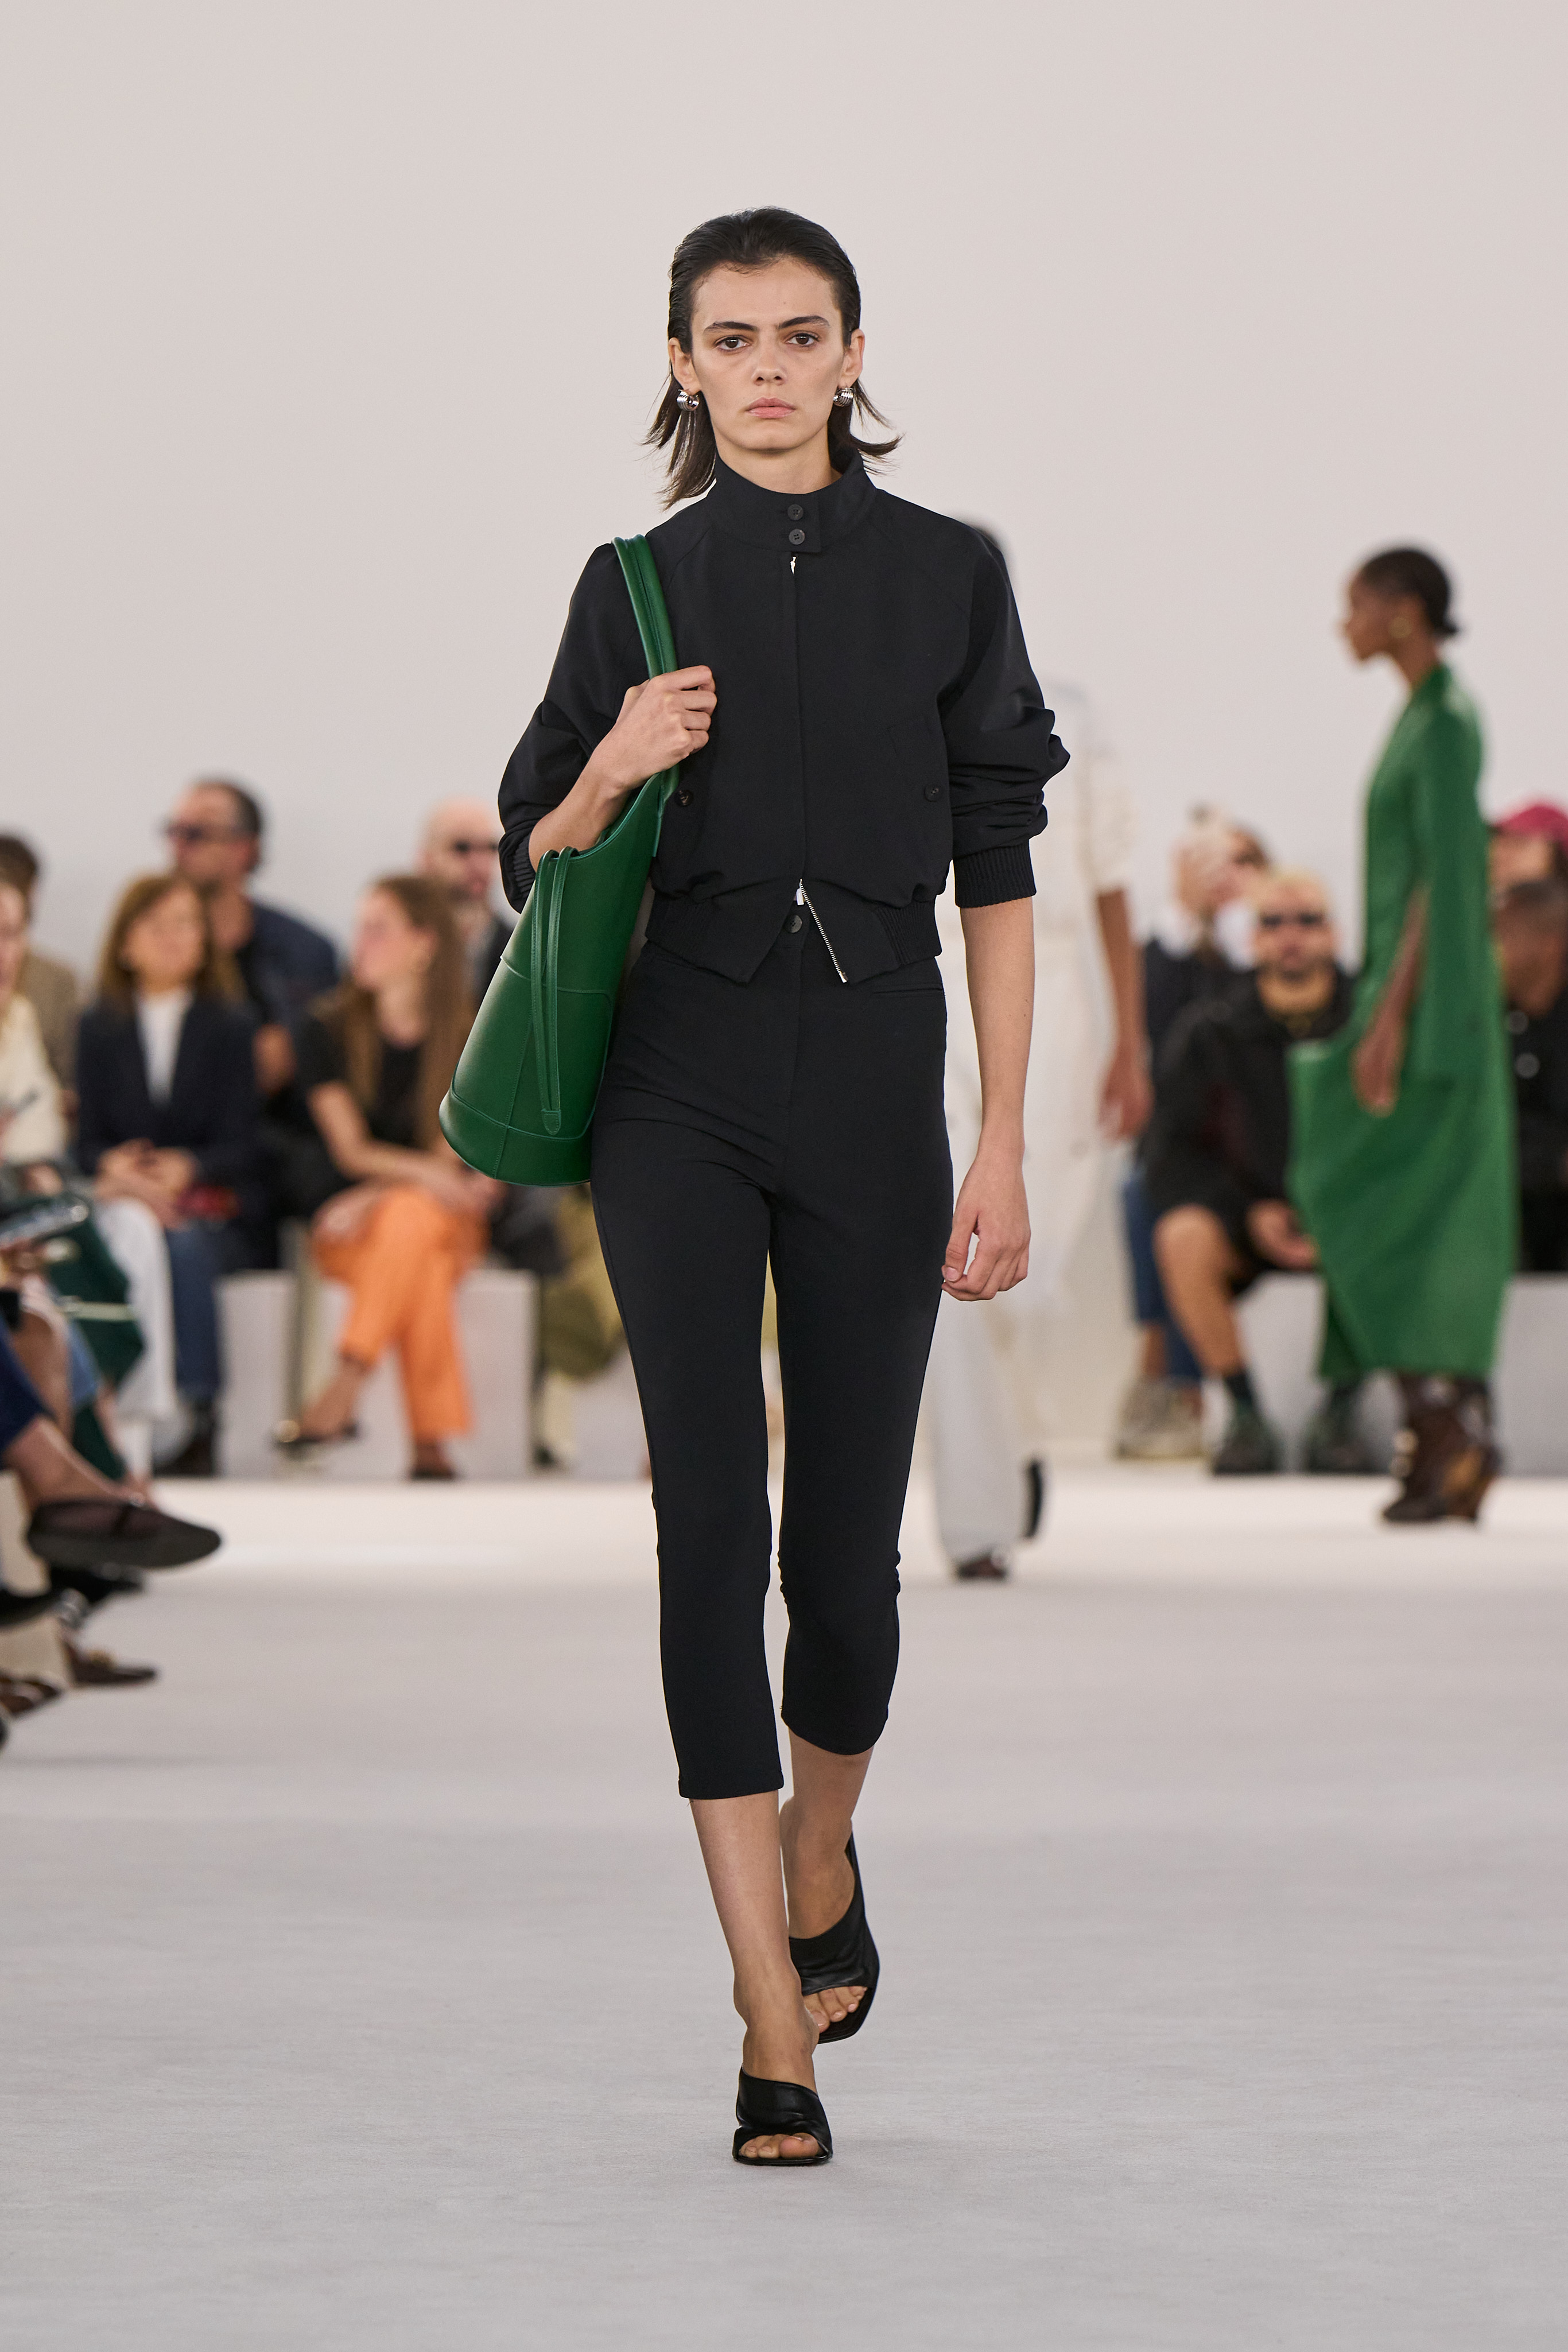 A Ferragamo model wearing a black cropped jacket and cropped leggings on the runway.